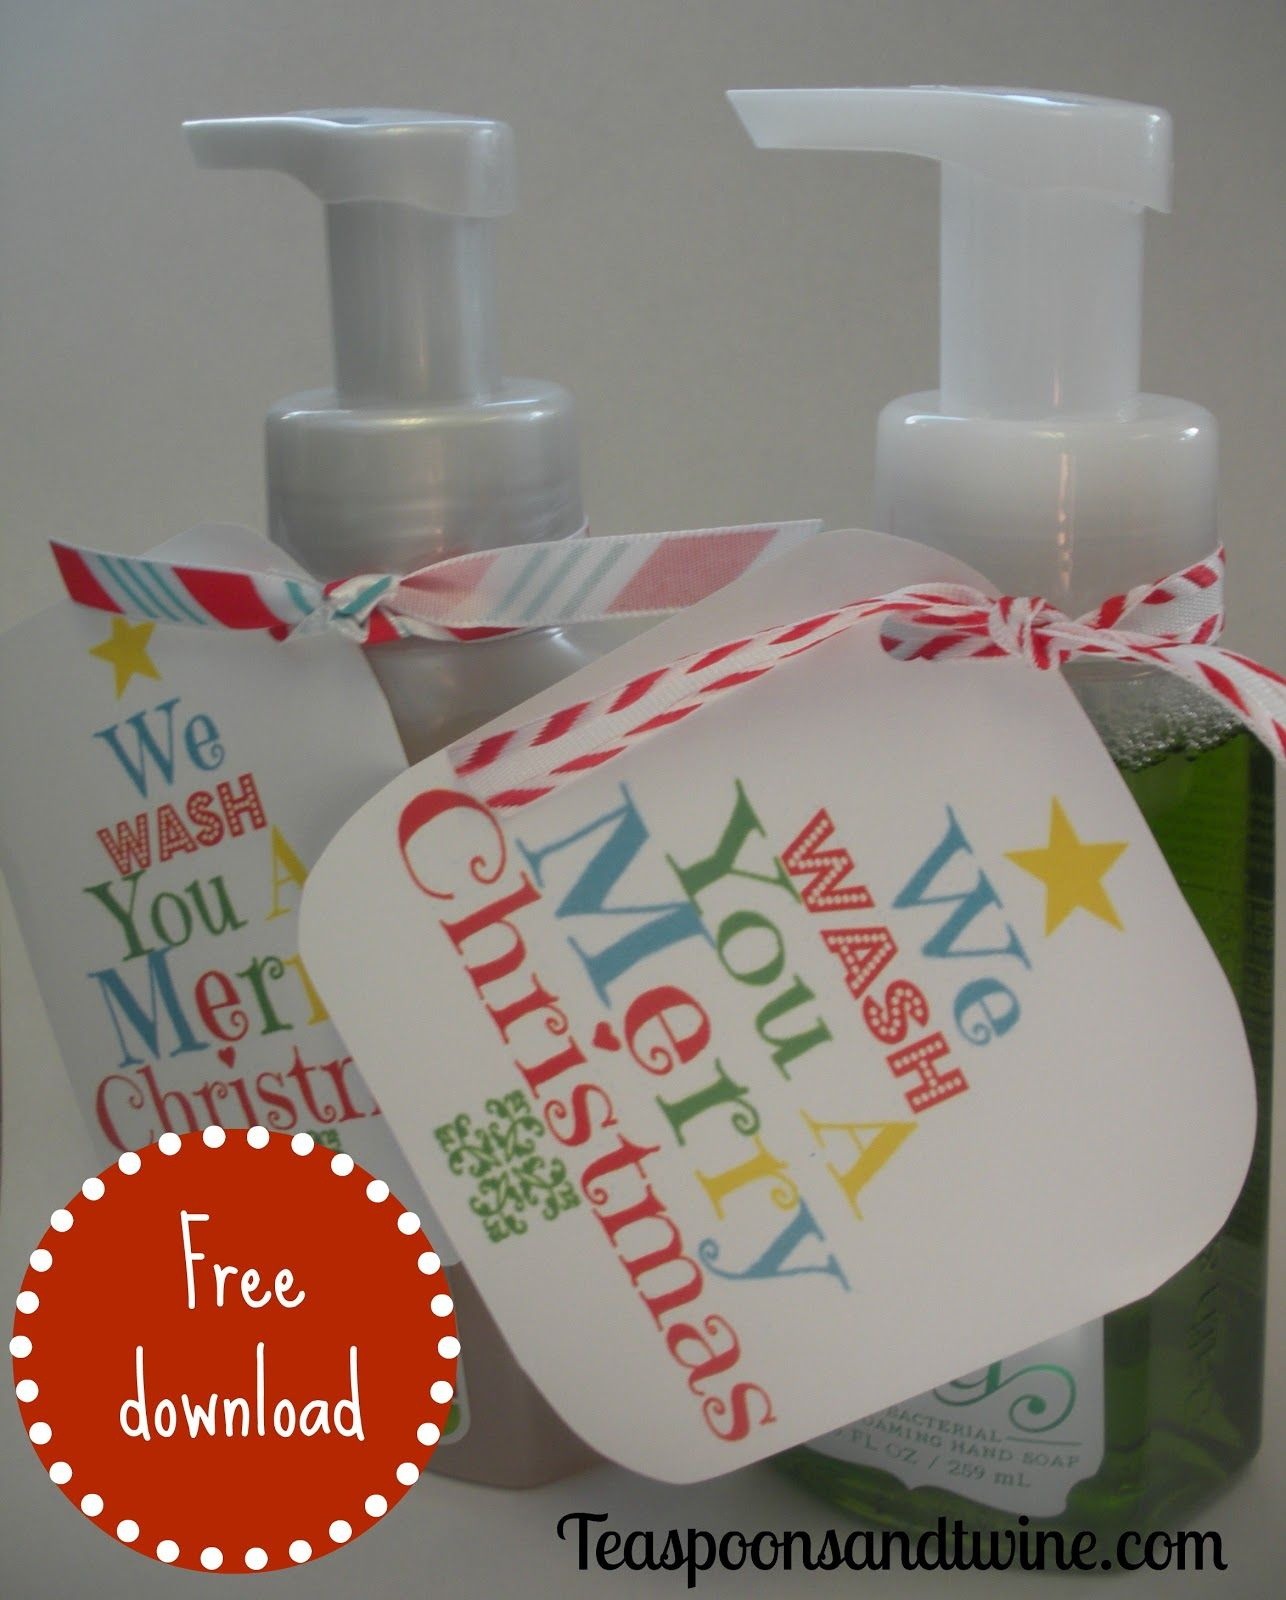 Why Soap Is The Only Present You Need This Christmas | Holiday Gift - We Wash You A Merry Christmas Free Printable